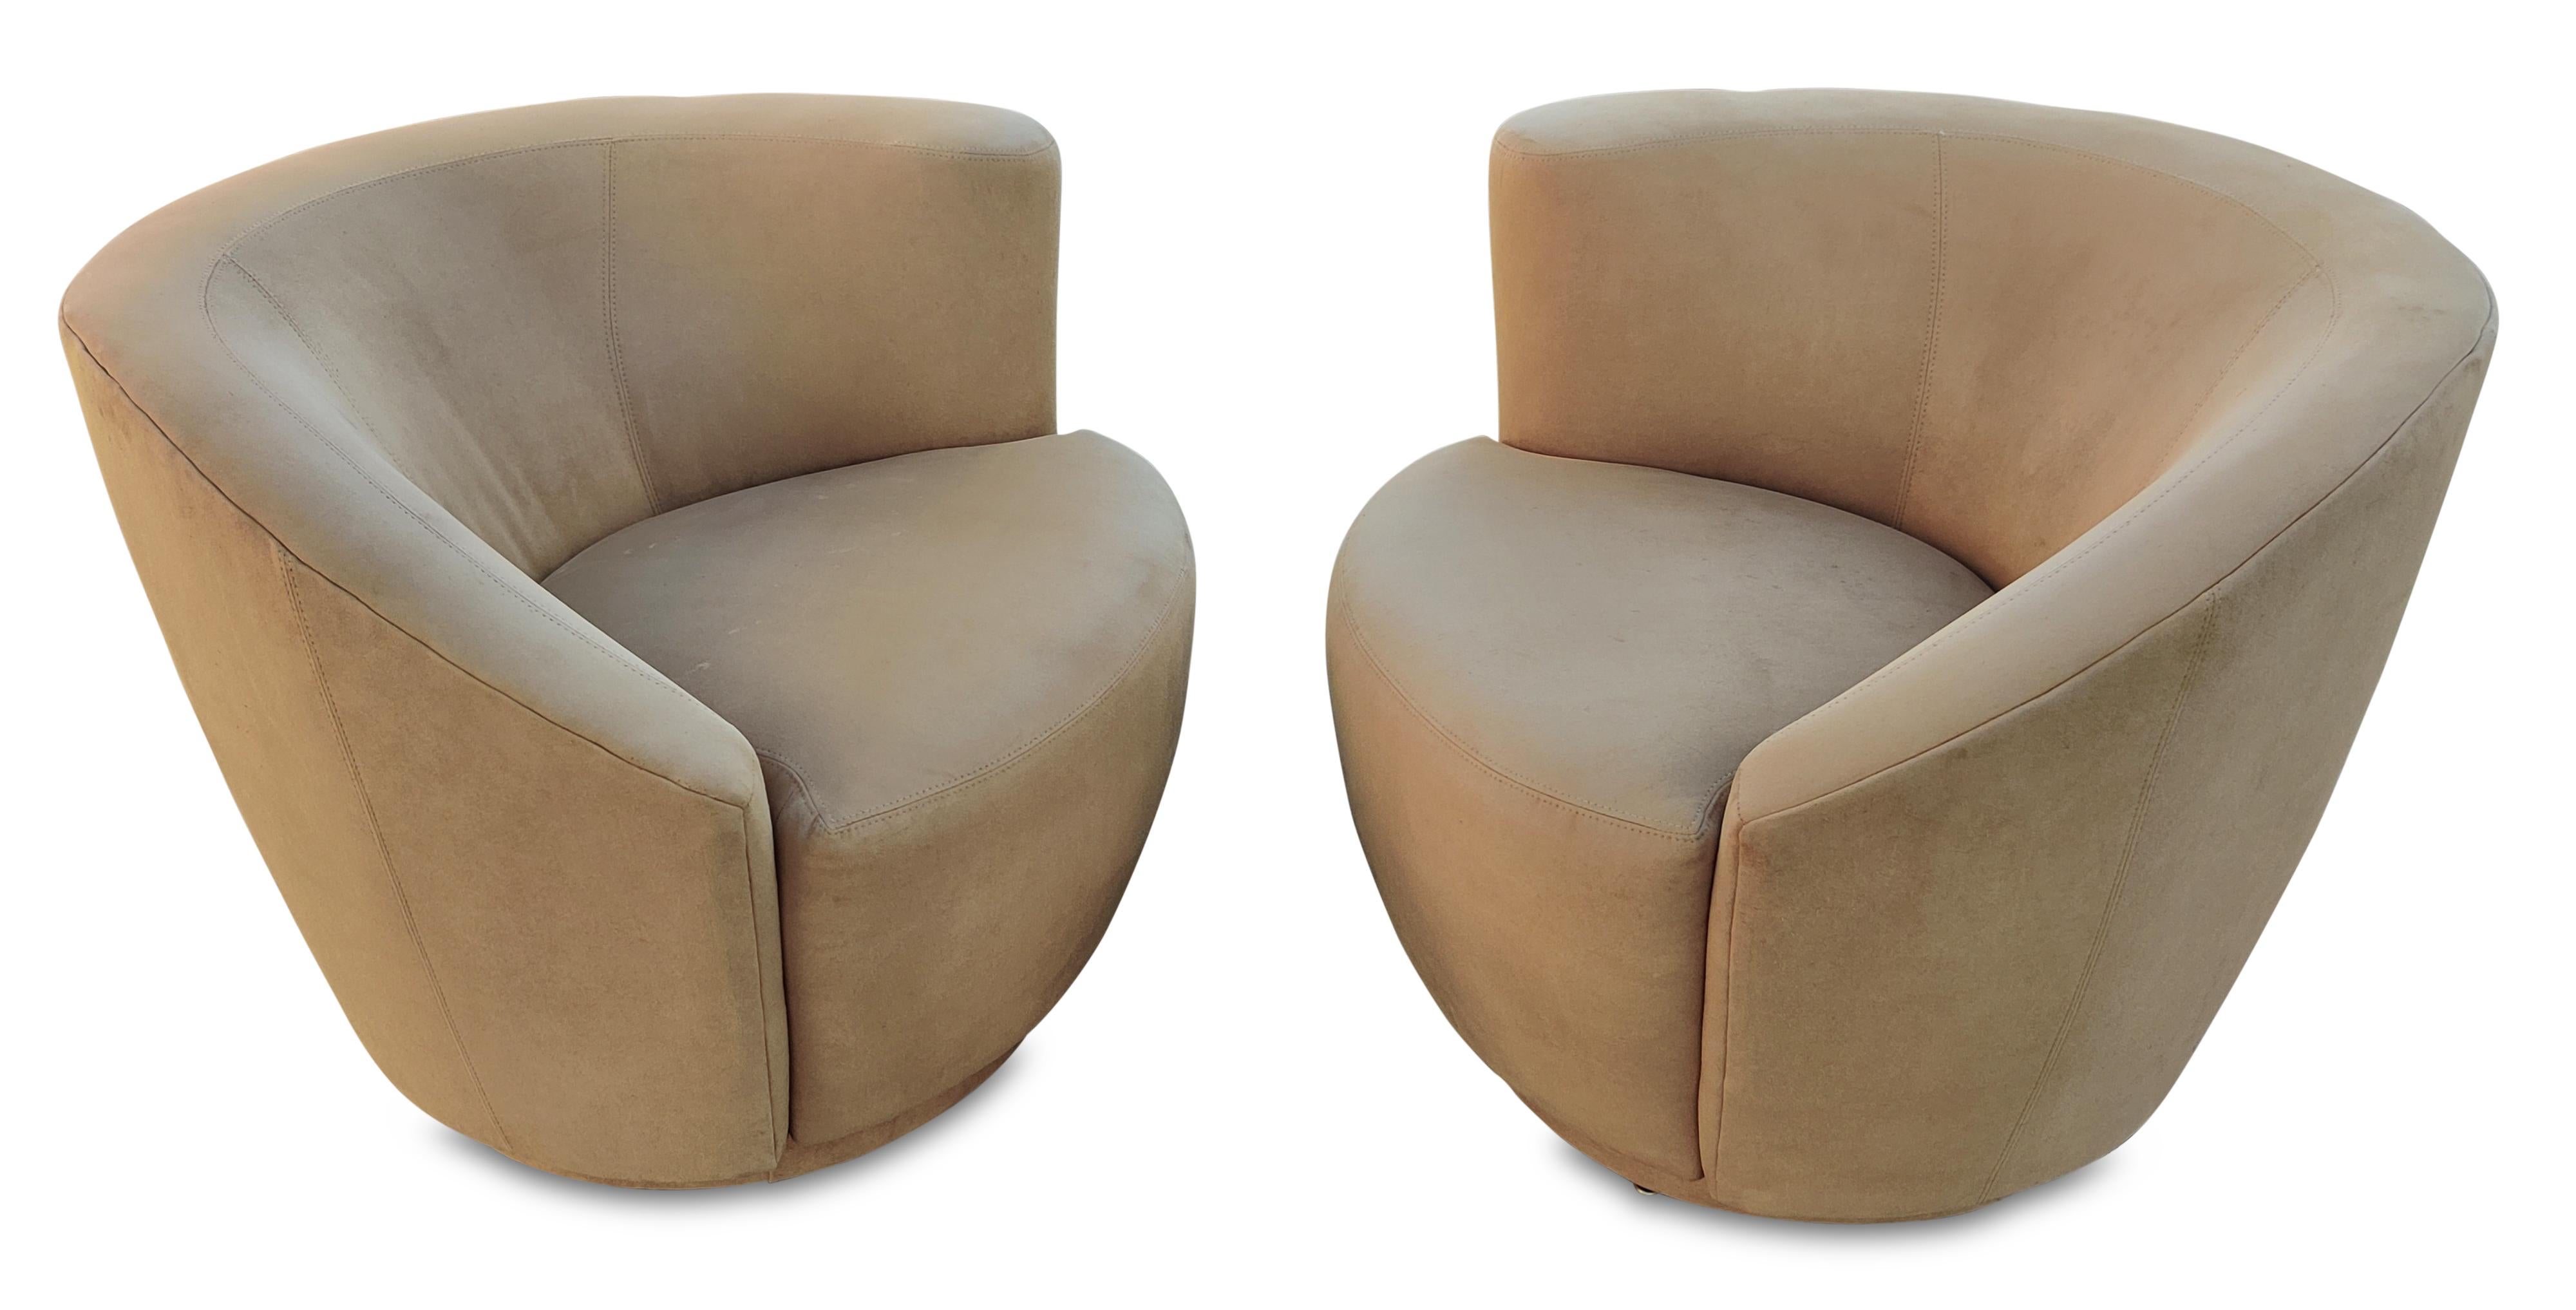 Reminiscent of the Nautilus chair, designed by Vladimir Kagan in 1950, here is a sculptural pair (left and right) of iconic mid-century modern swivel lounge chairs. Its distinct and organic design features a curved, shell-like shape made of suede